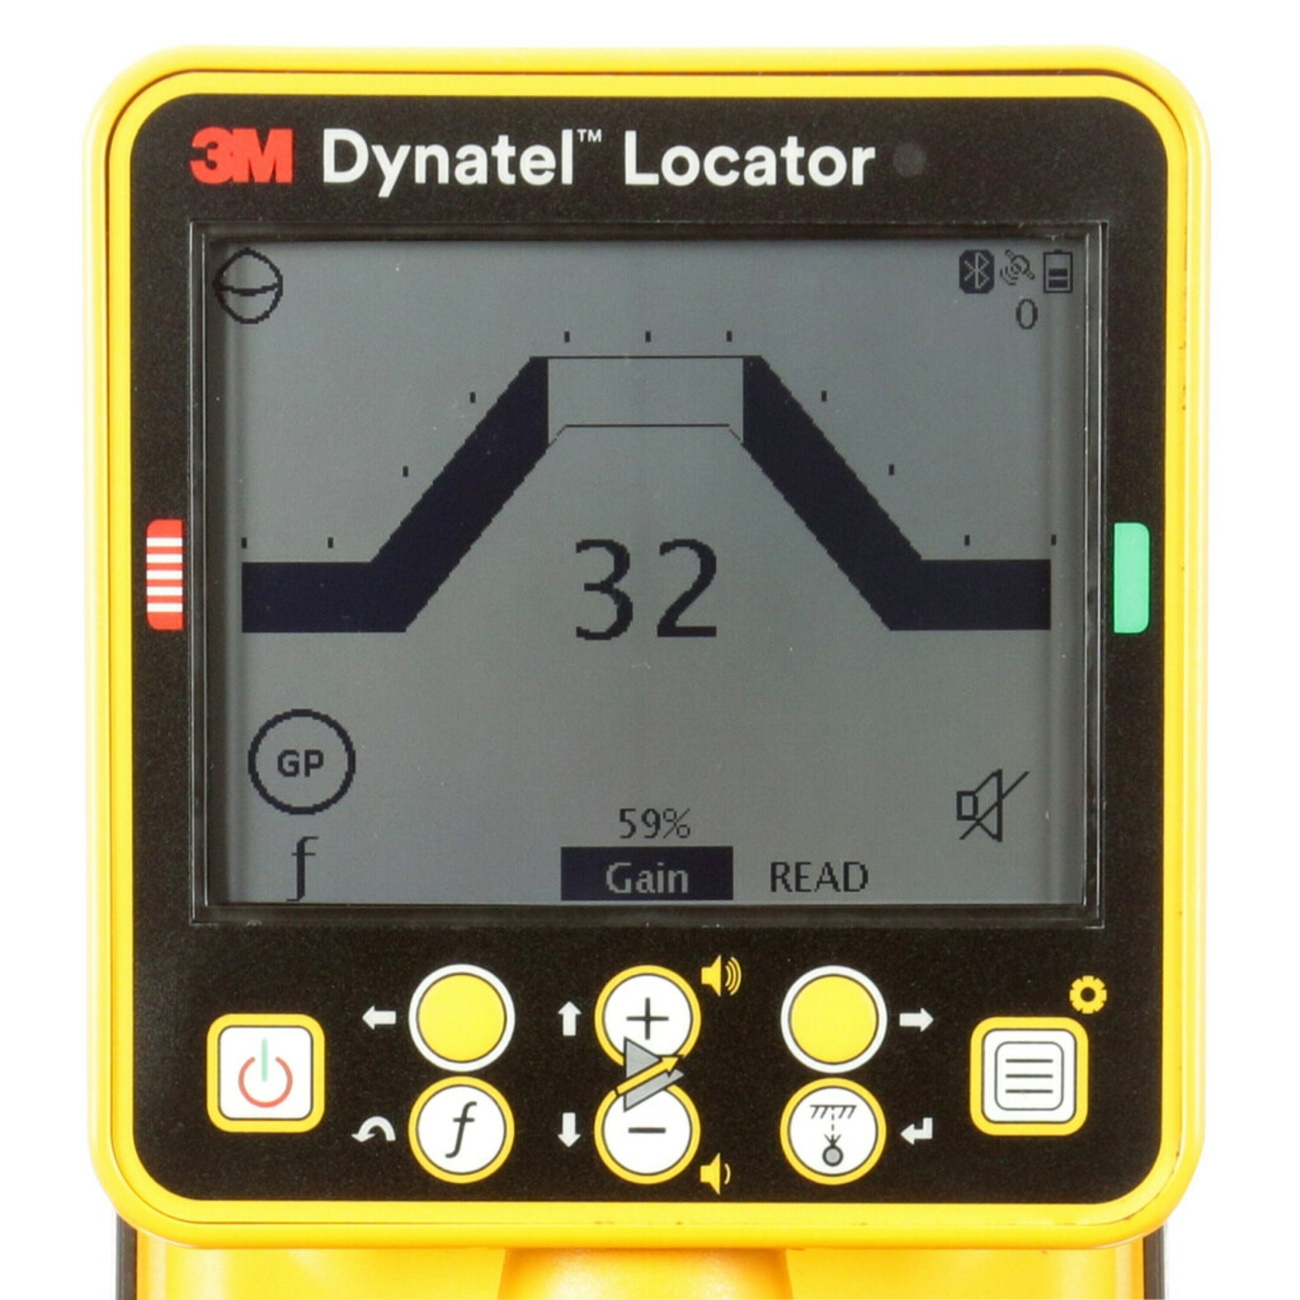 3M Dynatel locator 2550XE EMS/ID, markers/cables/pipes only, 1 per pack